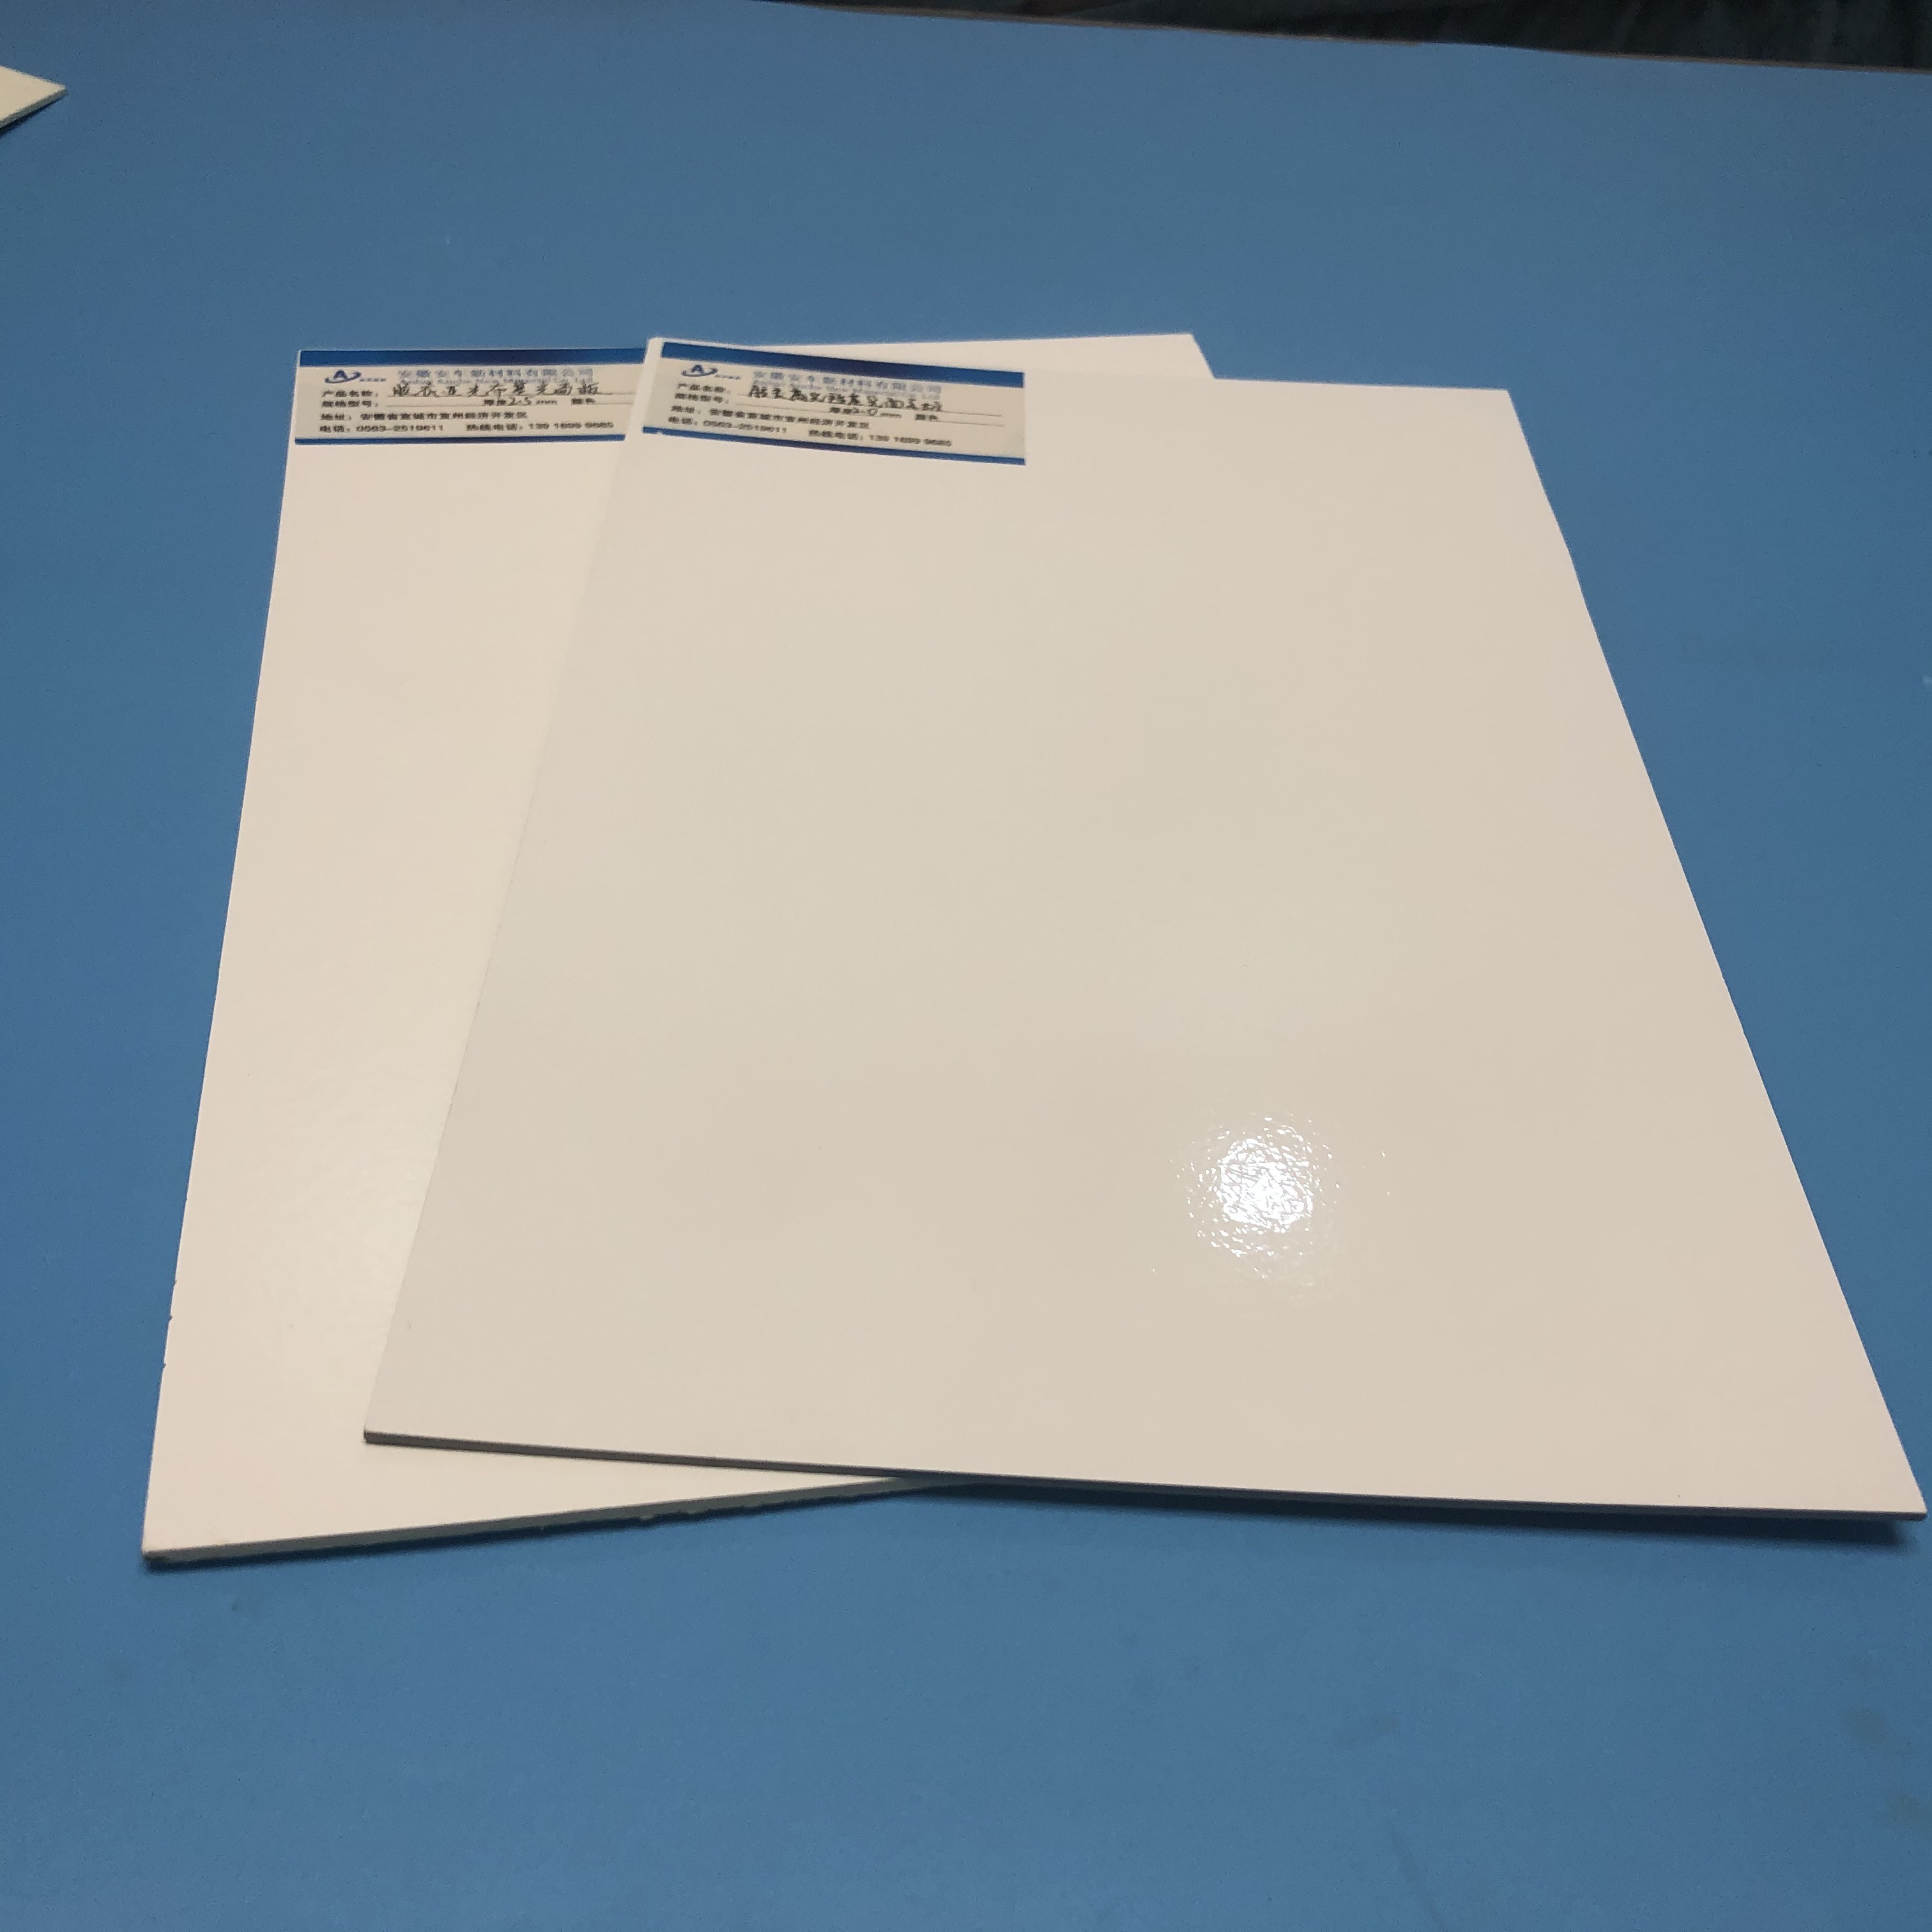 High Gloss Gelcoat Flat FRP Sheet For Building Partition Board